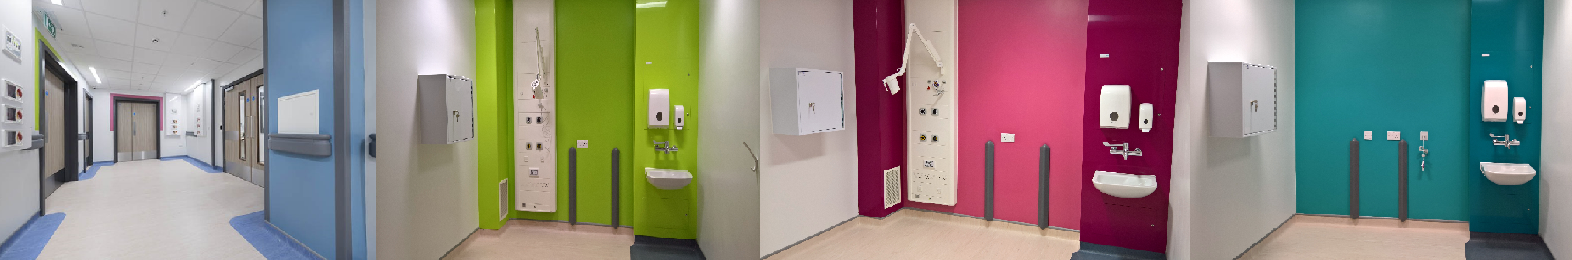 Colour-coded treatment rooms match feature walls in each room, helping patients to orientate around the department